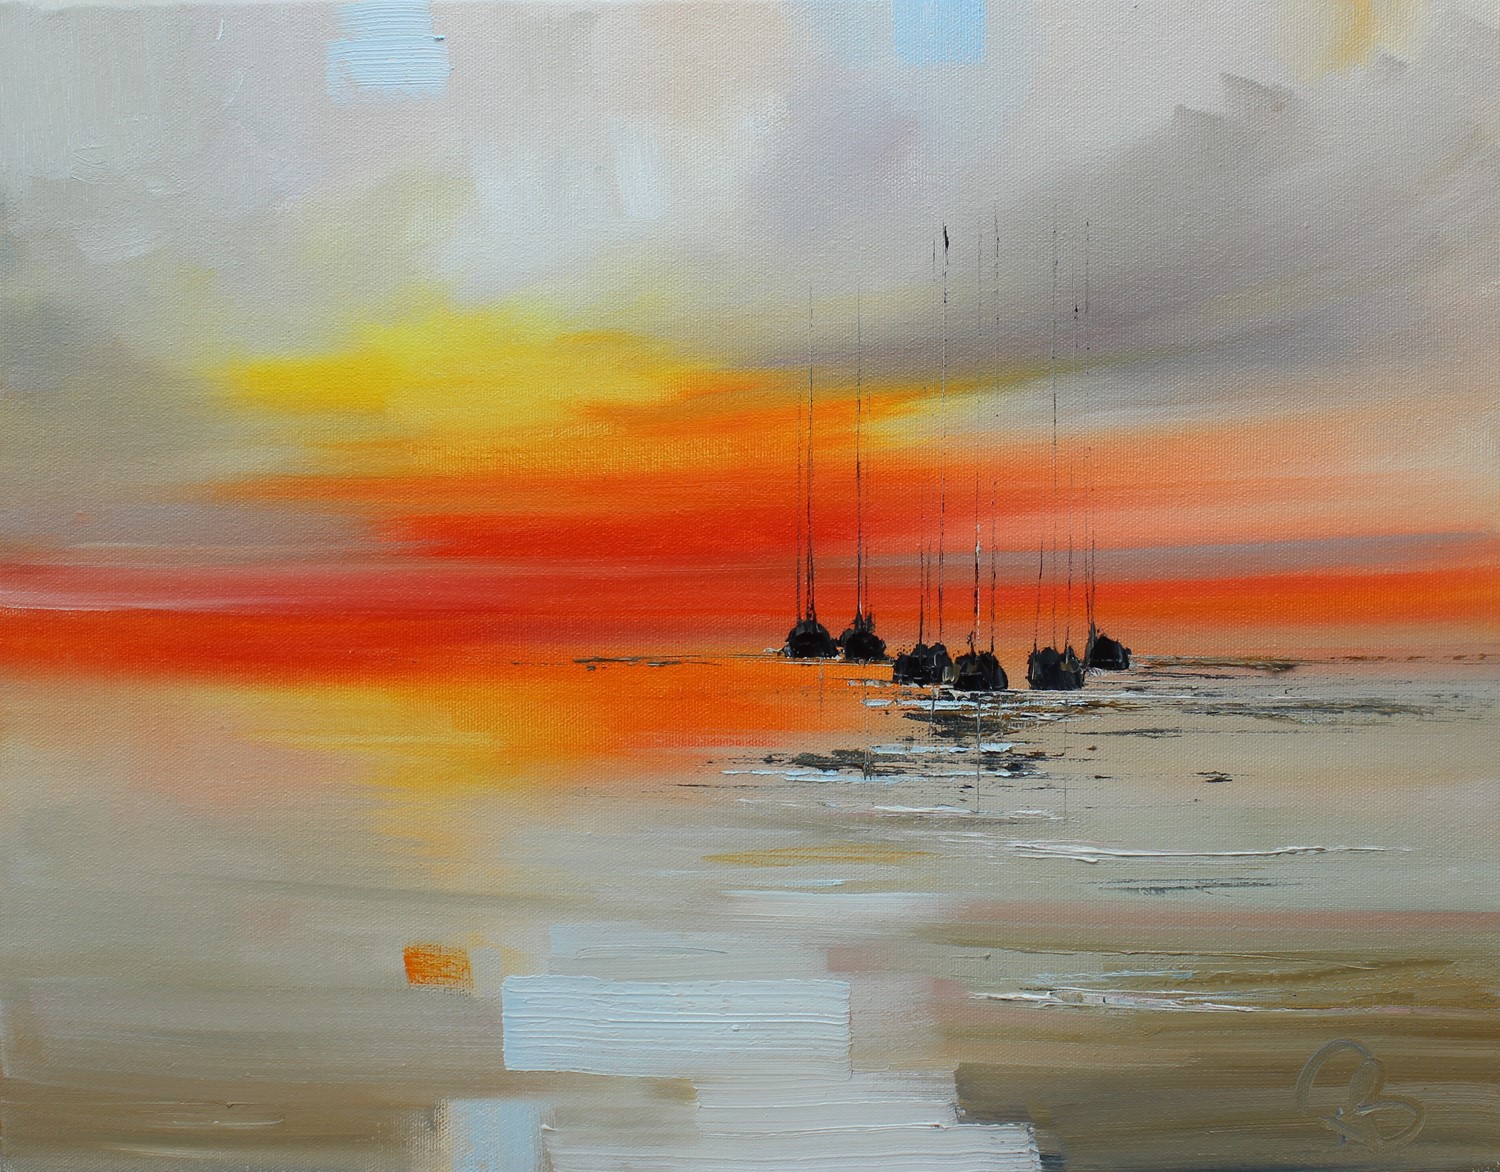 'Yachts All lined up at Sunset' by artist Rosanne Barr